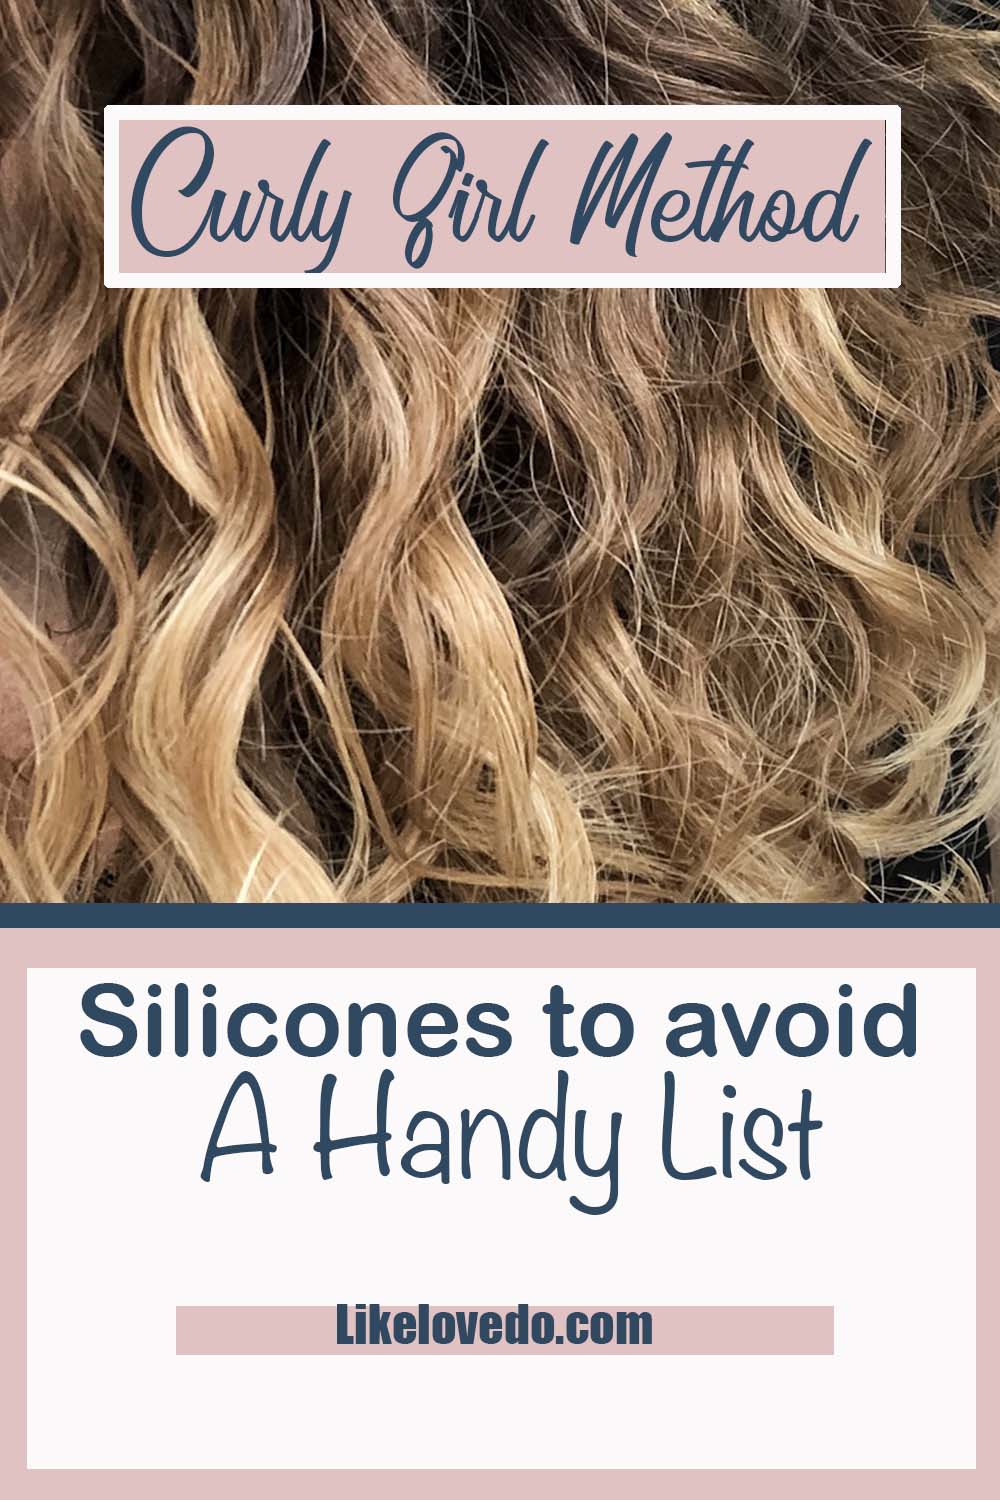 Curly Girl Method Silicones to avoid